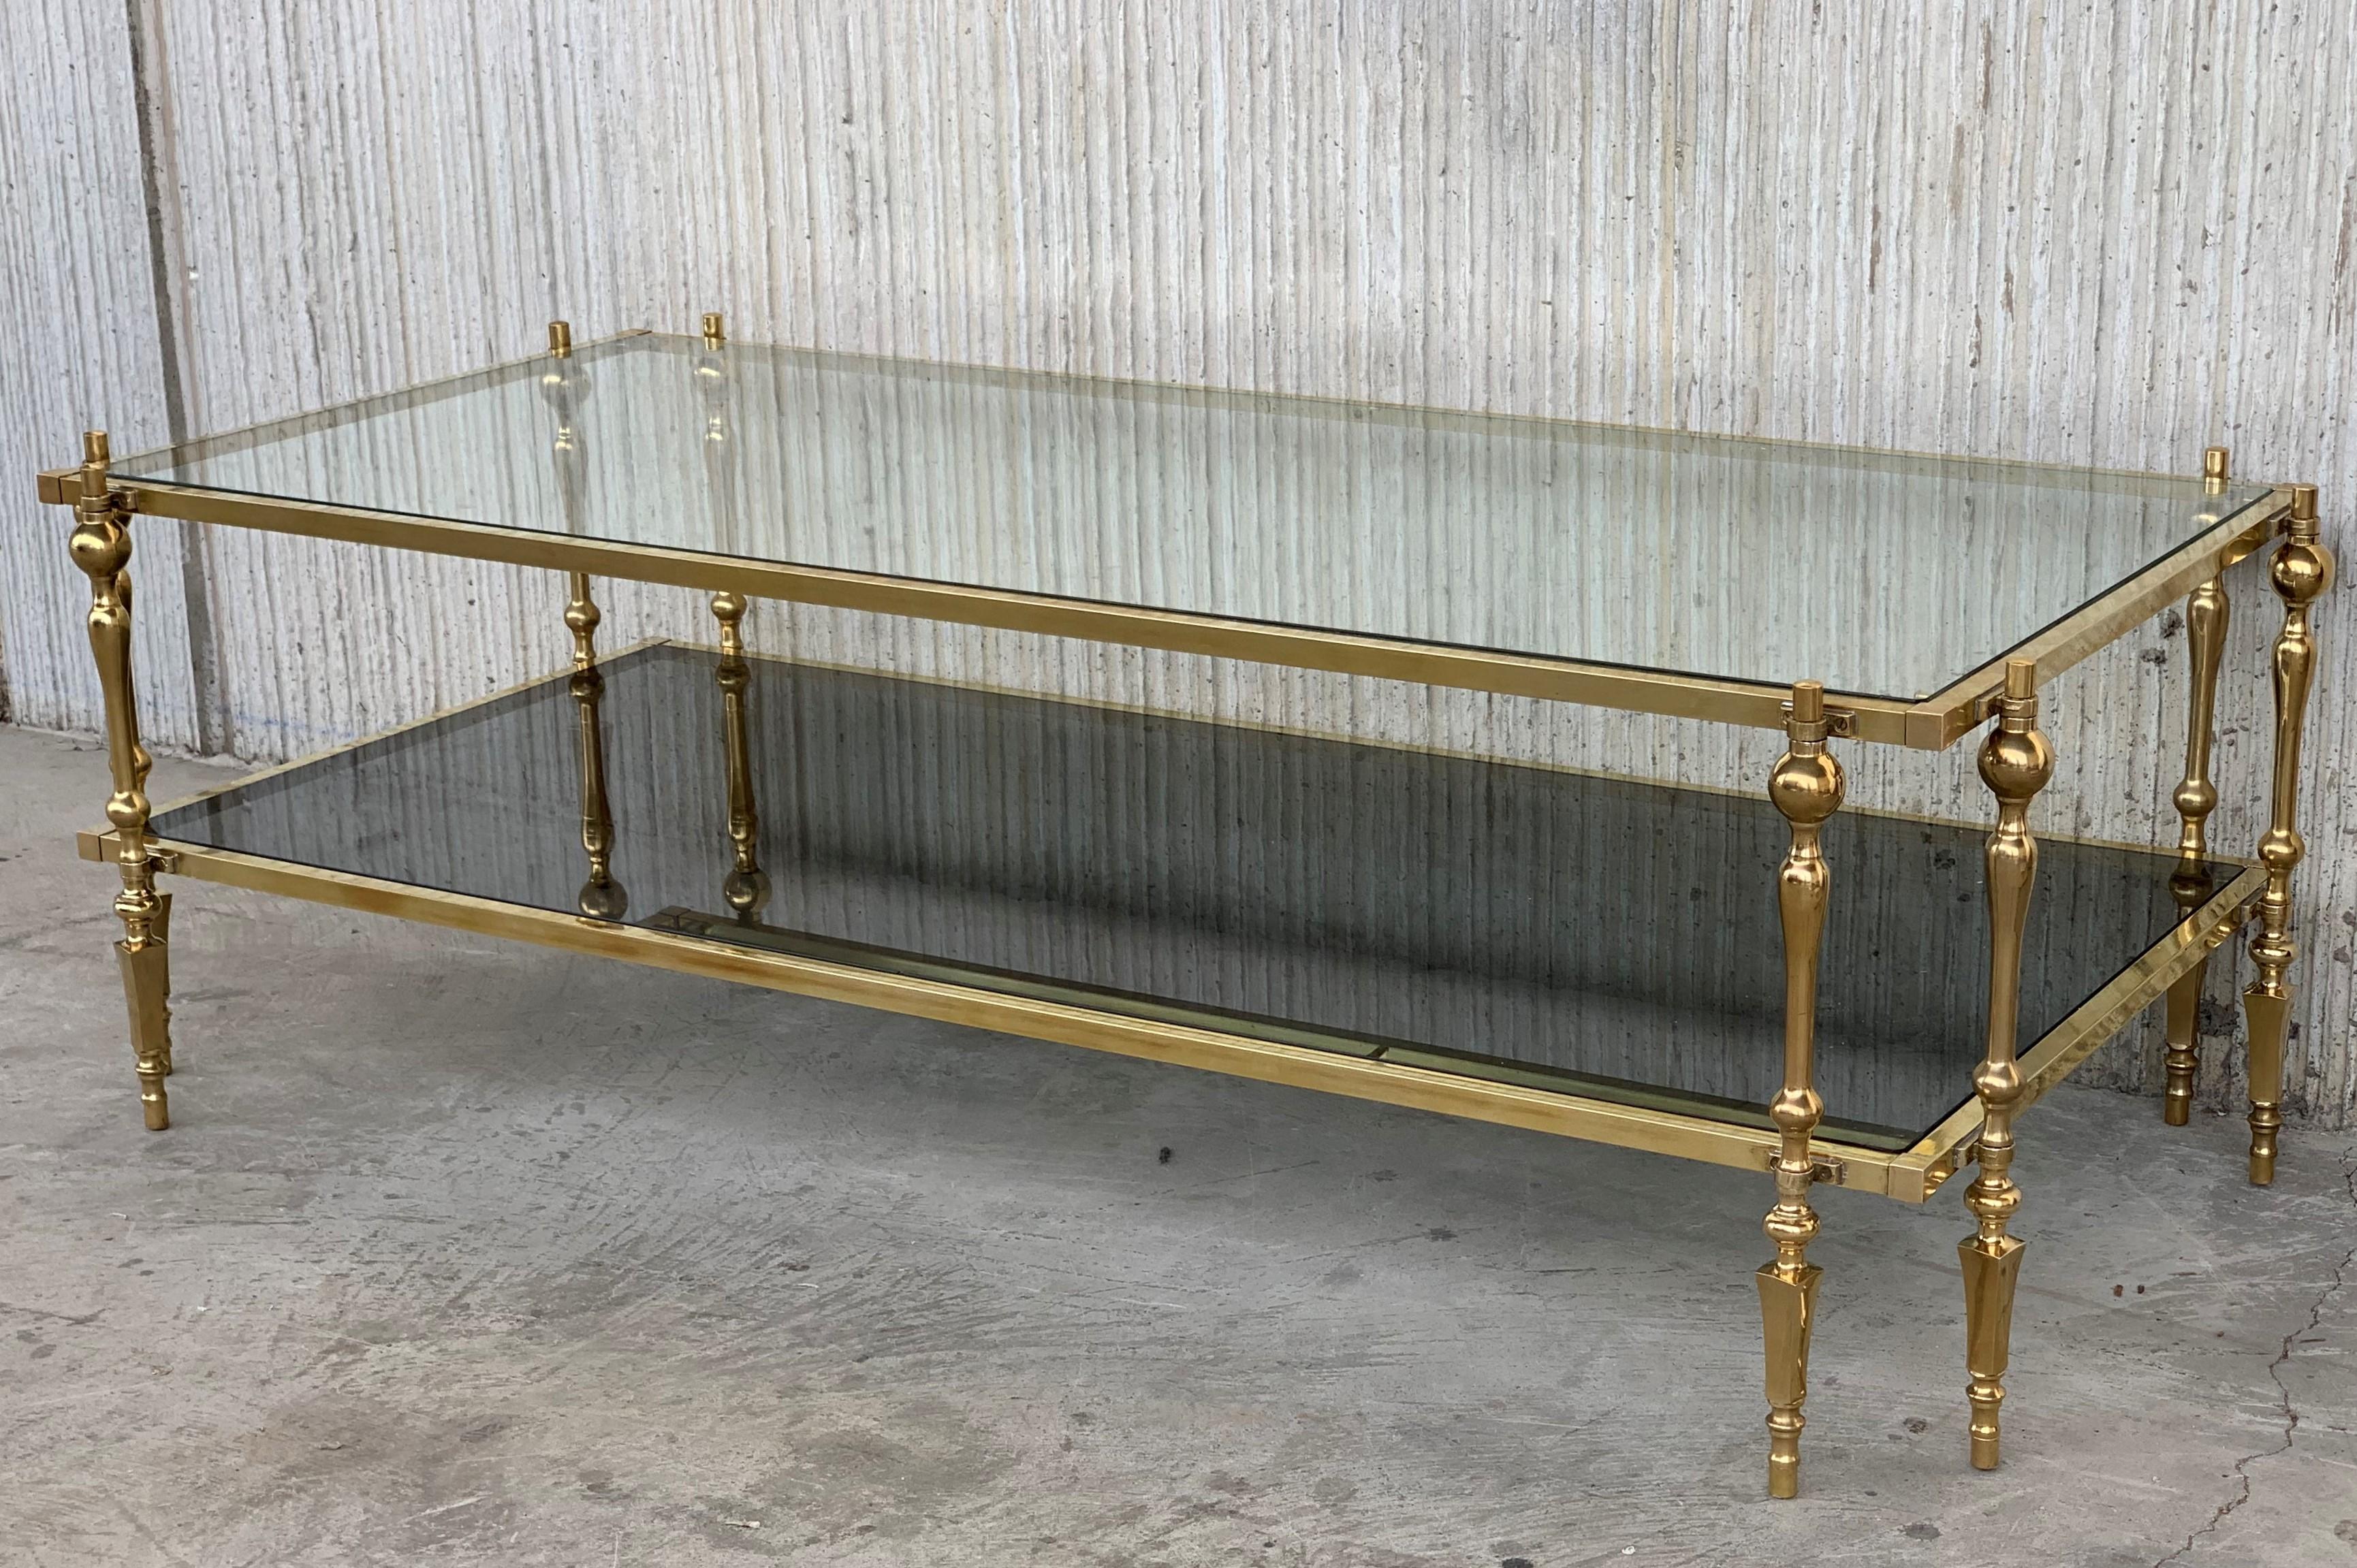 20th Century Midcentury Spanish Brass and Bronze Coffee Table with Smoked Glass & Double Leg